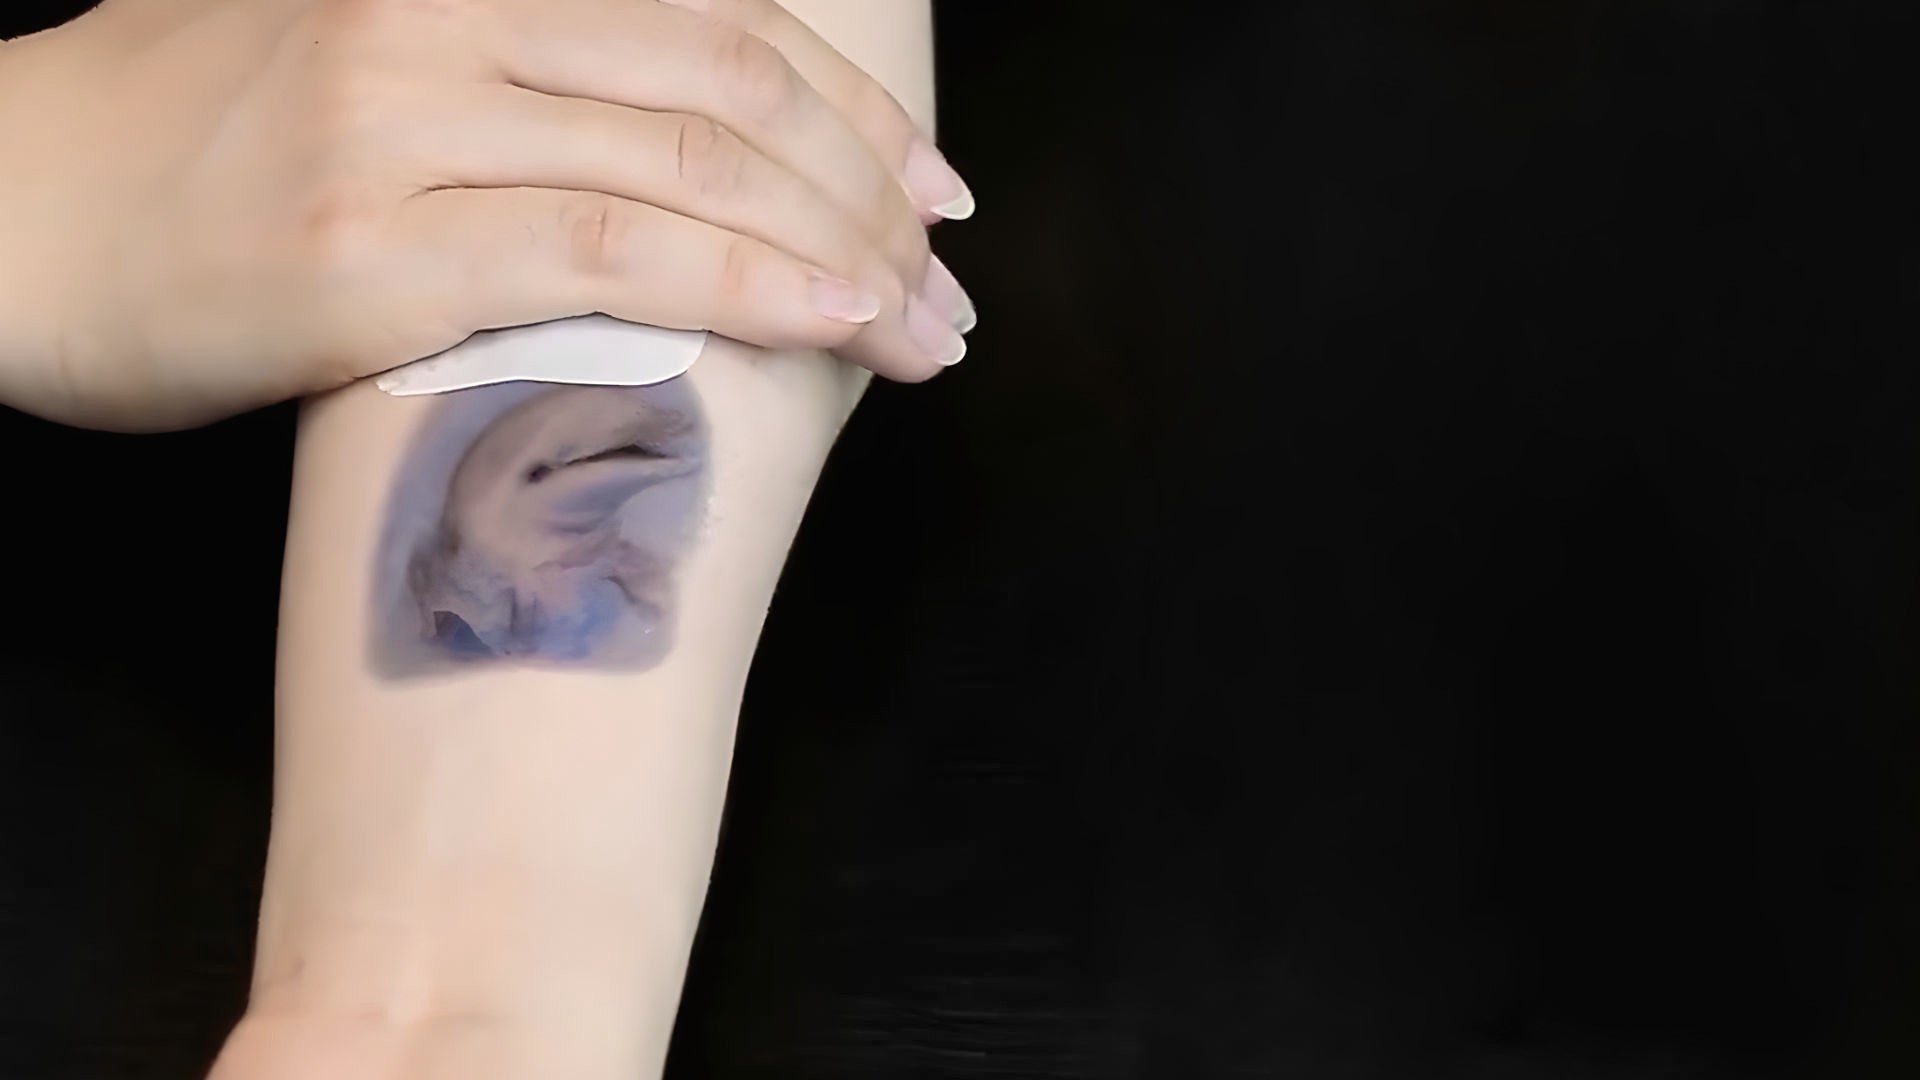 Print Your Own Temporary Tattoo!